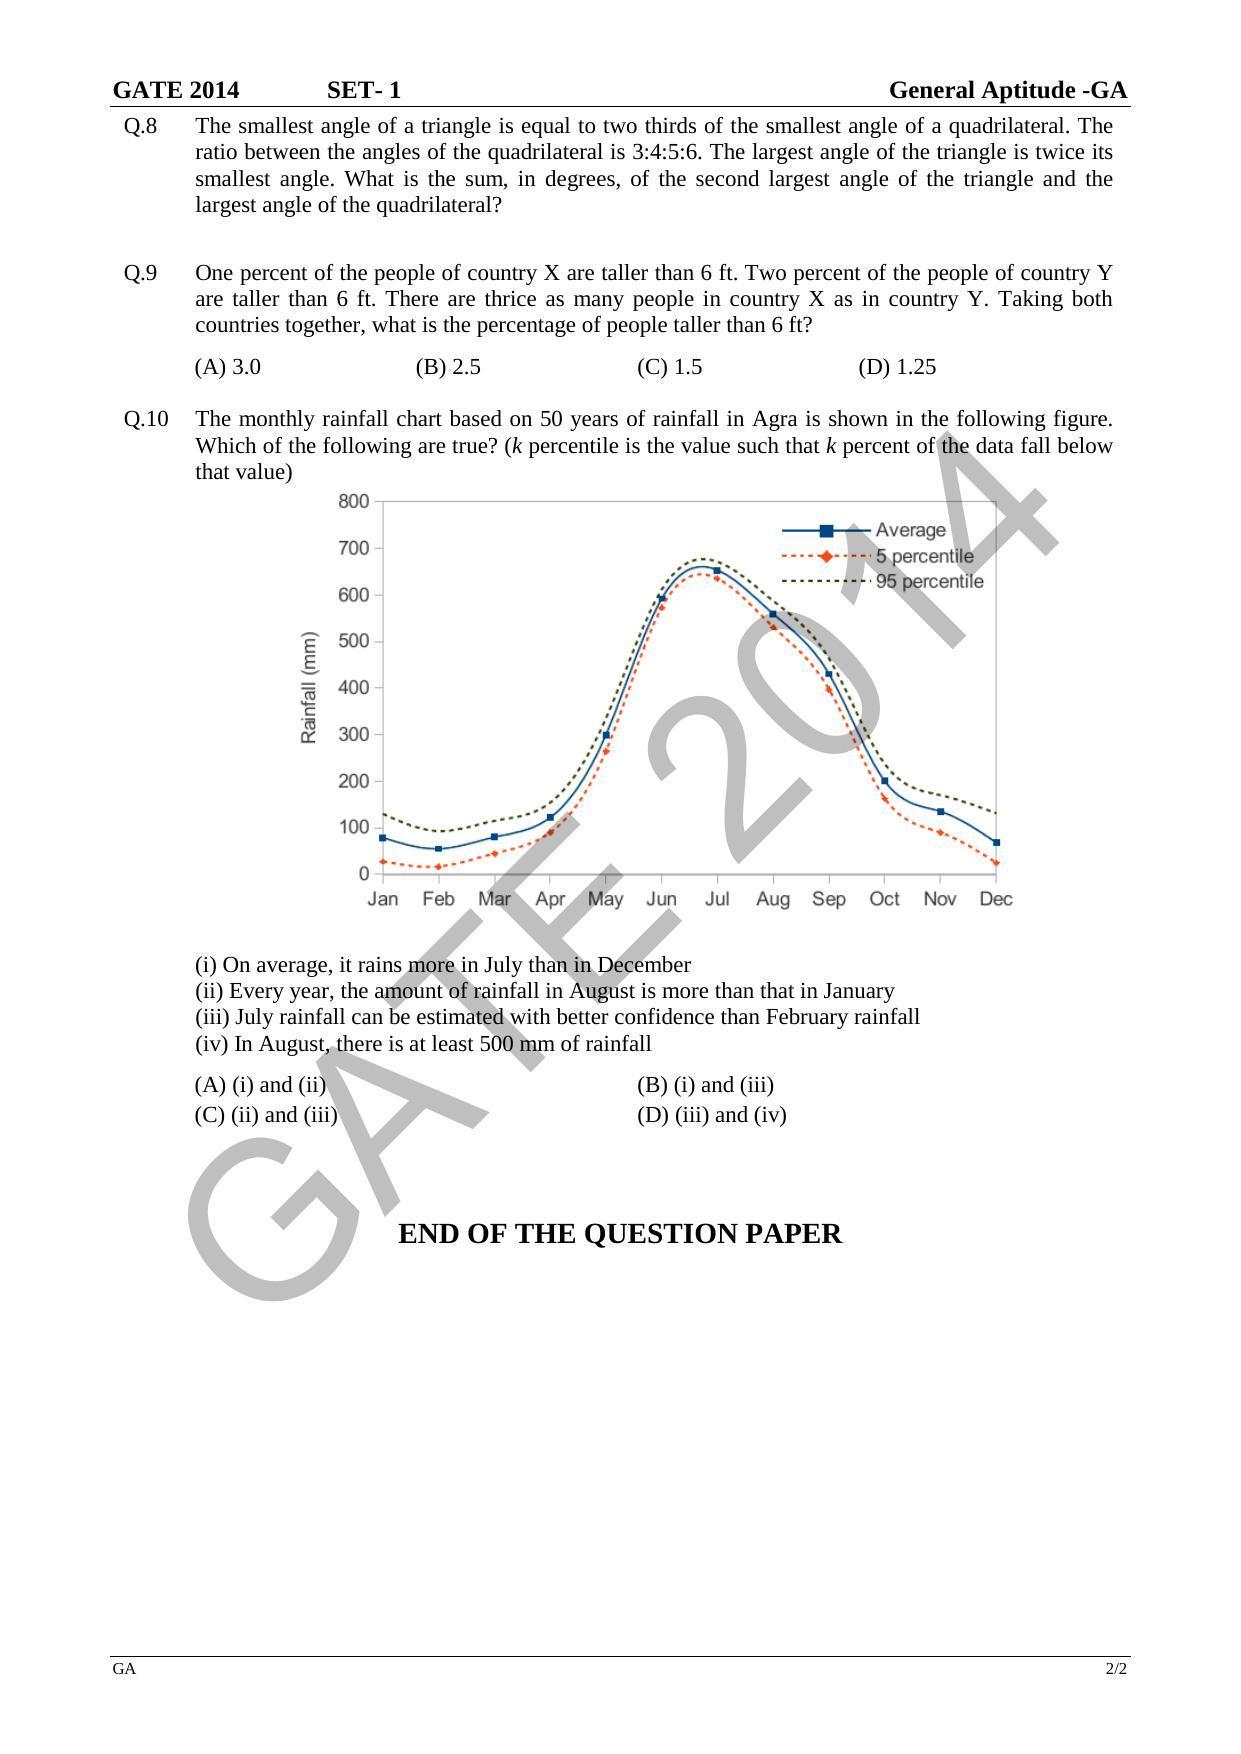 GATE 2014 Civil Engineering (CE) Question Paper with Answer Key - Page 7